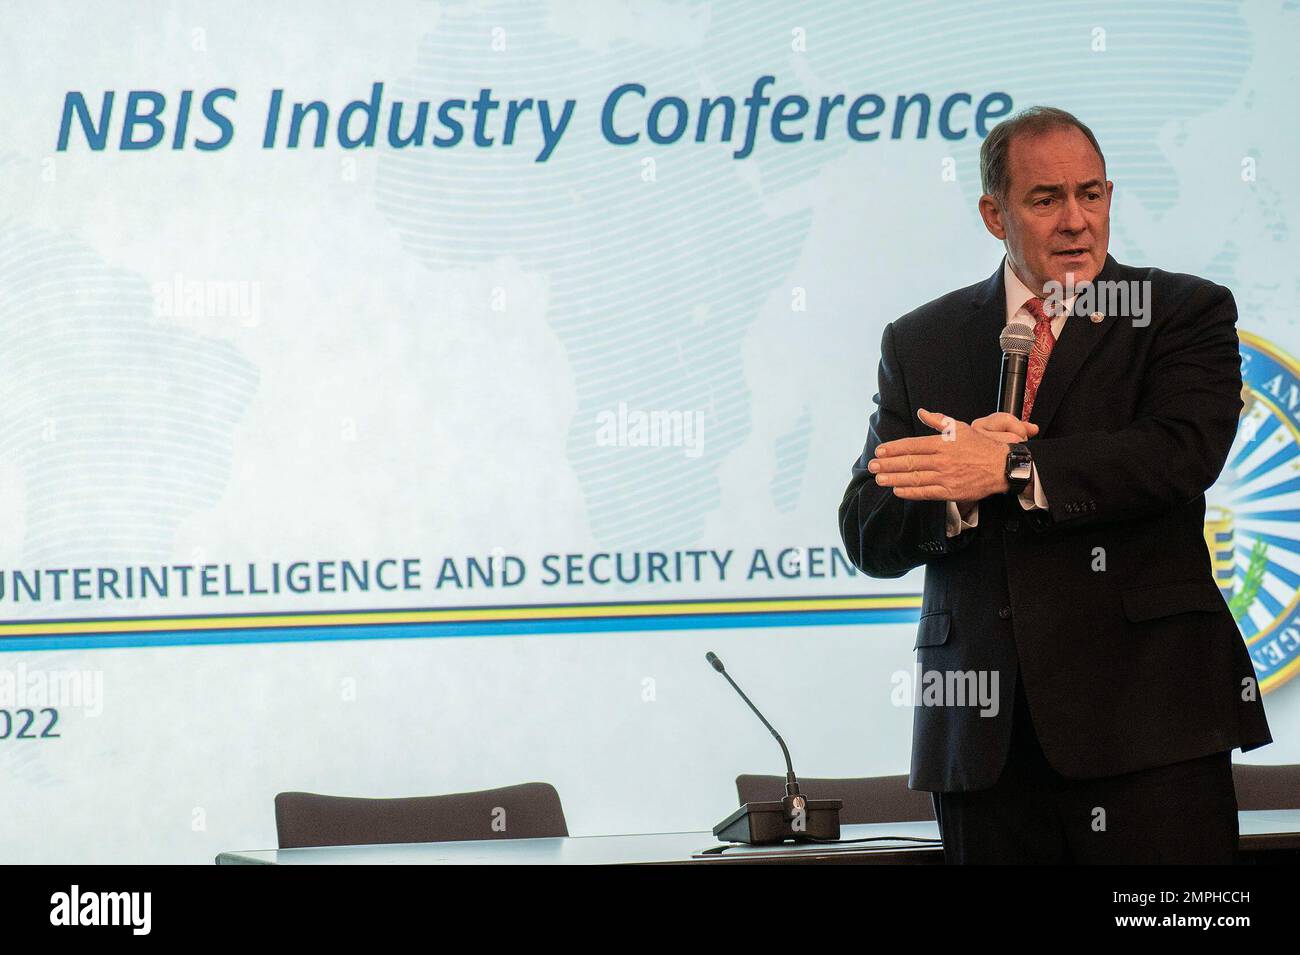 MCLEAN, Va. (Oct. 18, 2022) - William Lietzau, Defense Counterintelligence and Security Agency (DCSA) director, welcomes personnel and facility security professionals from industry to the 2022 National Background Investigation Services (NBIS) Industry Conference. DCSA leaders and NBIS experts briefed cleared industry on NBIS program status; the impact on industry's feedback and partnership with DCSA; and onboarding requirements. NBIS is the backbone of the Trusted Workforce 2.0 whole-of-government background investigation reform effort overhauling the personnel vetting process by creating one Stock Photo